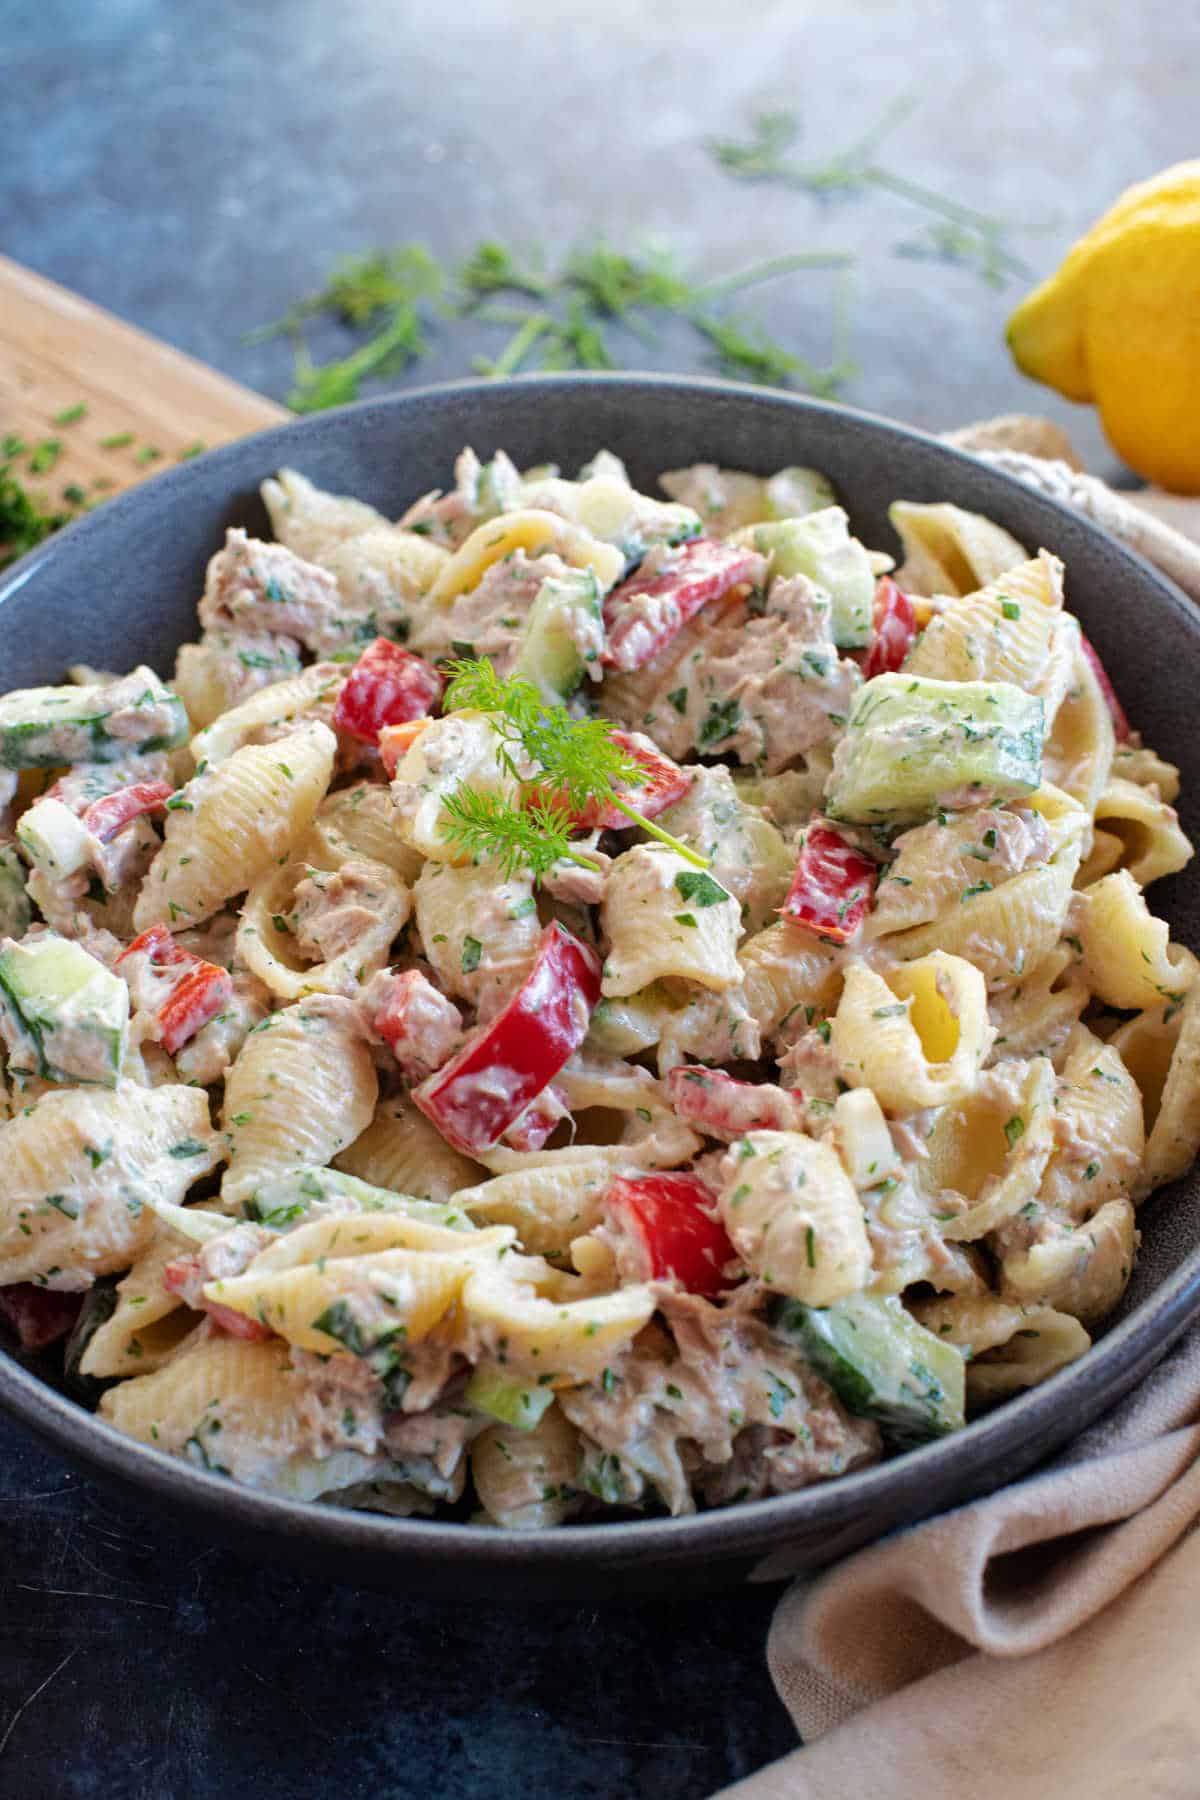 Best tuna pasta salad with red peppers.